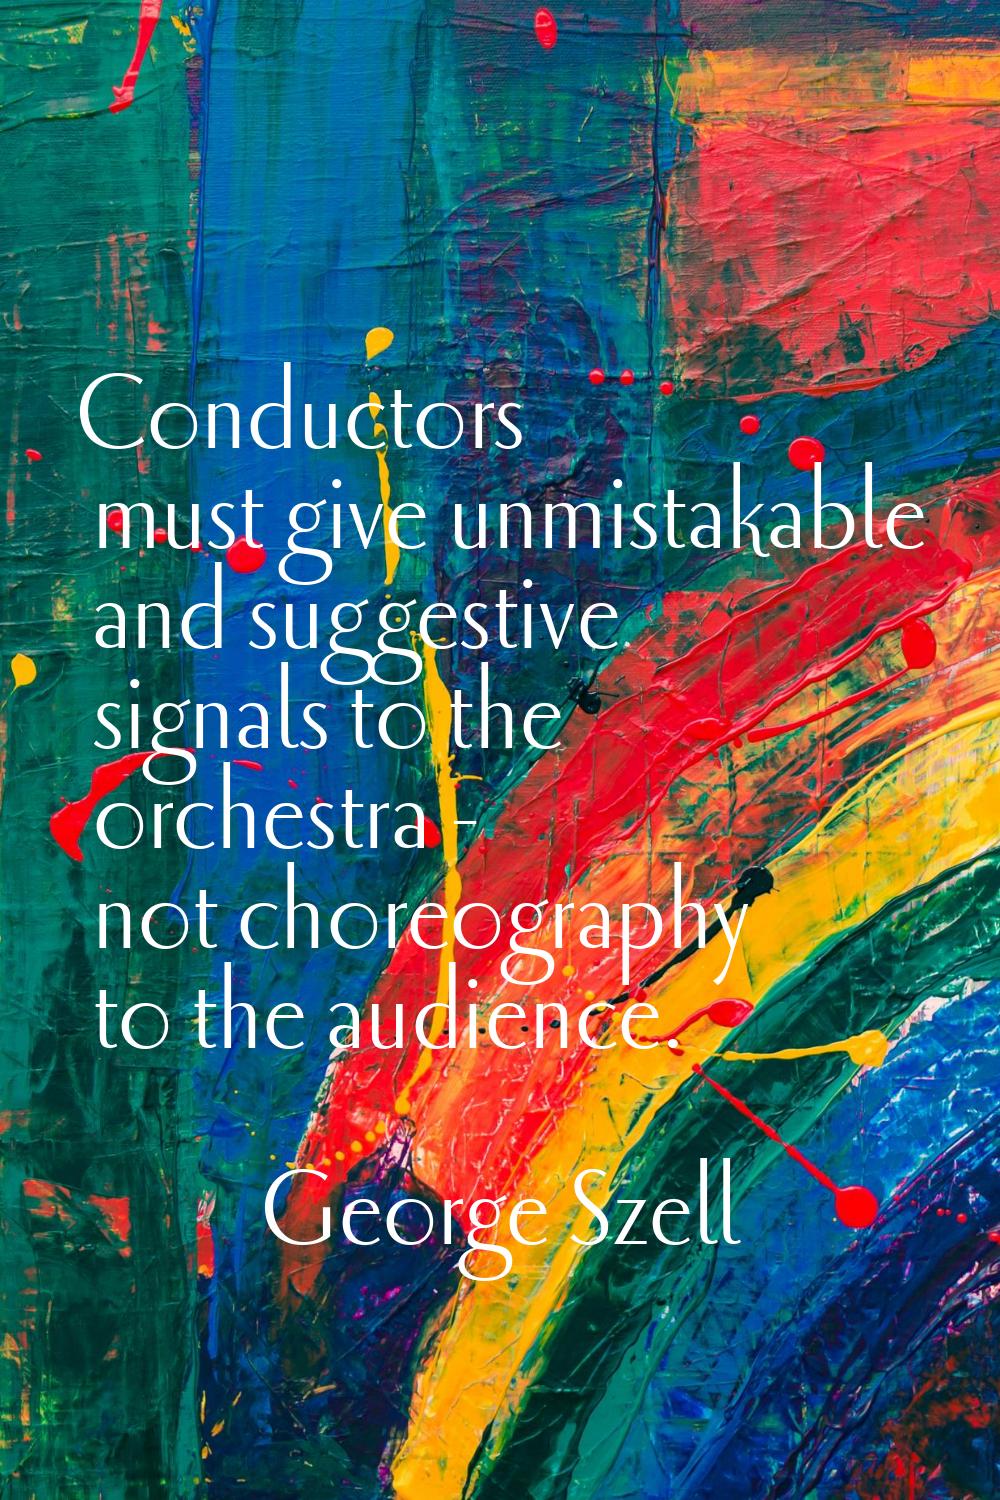 Conductors must give unmistakable and suggestive signals to the orchestra - not choreography to the